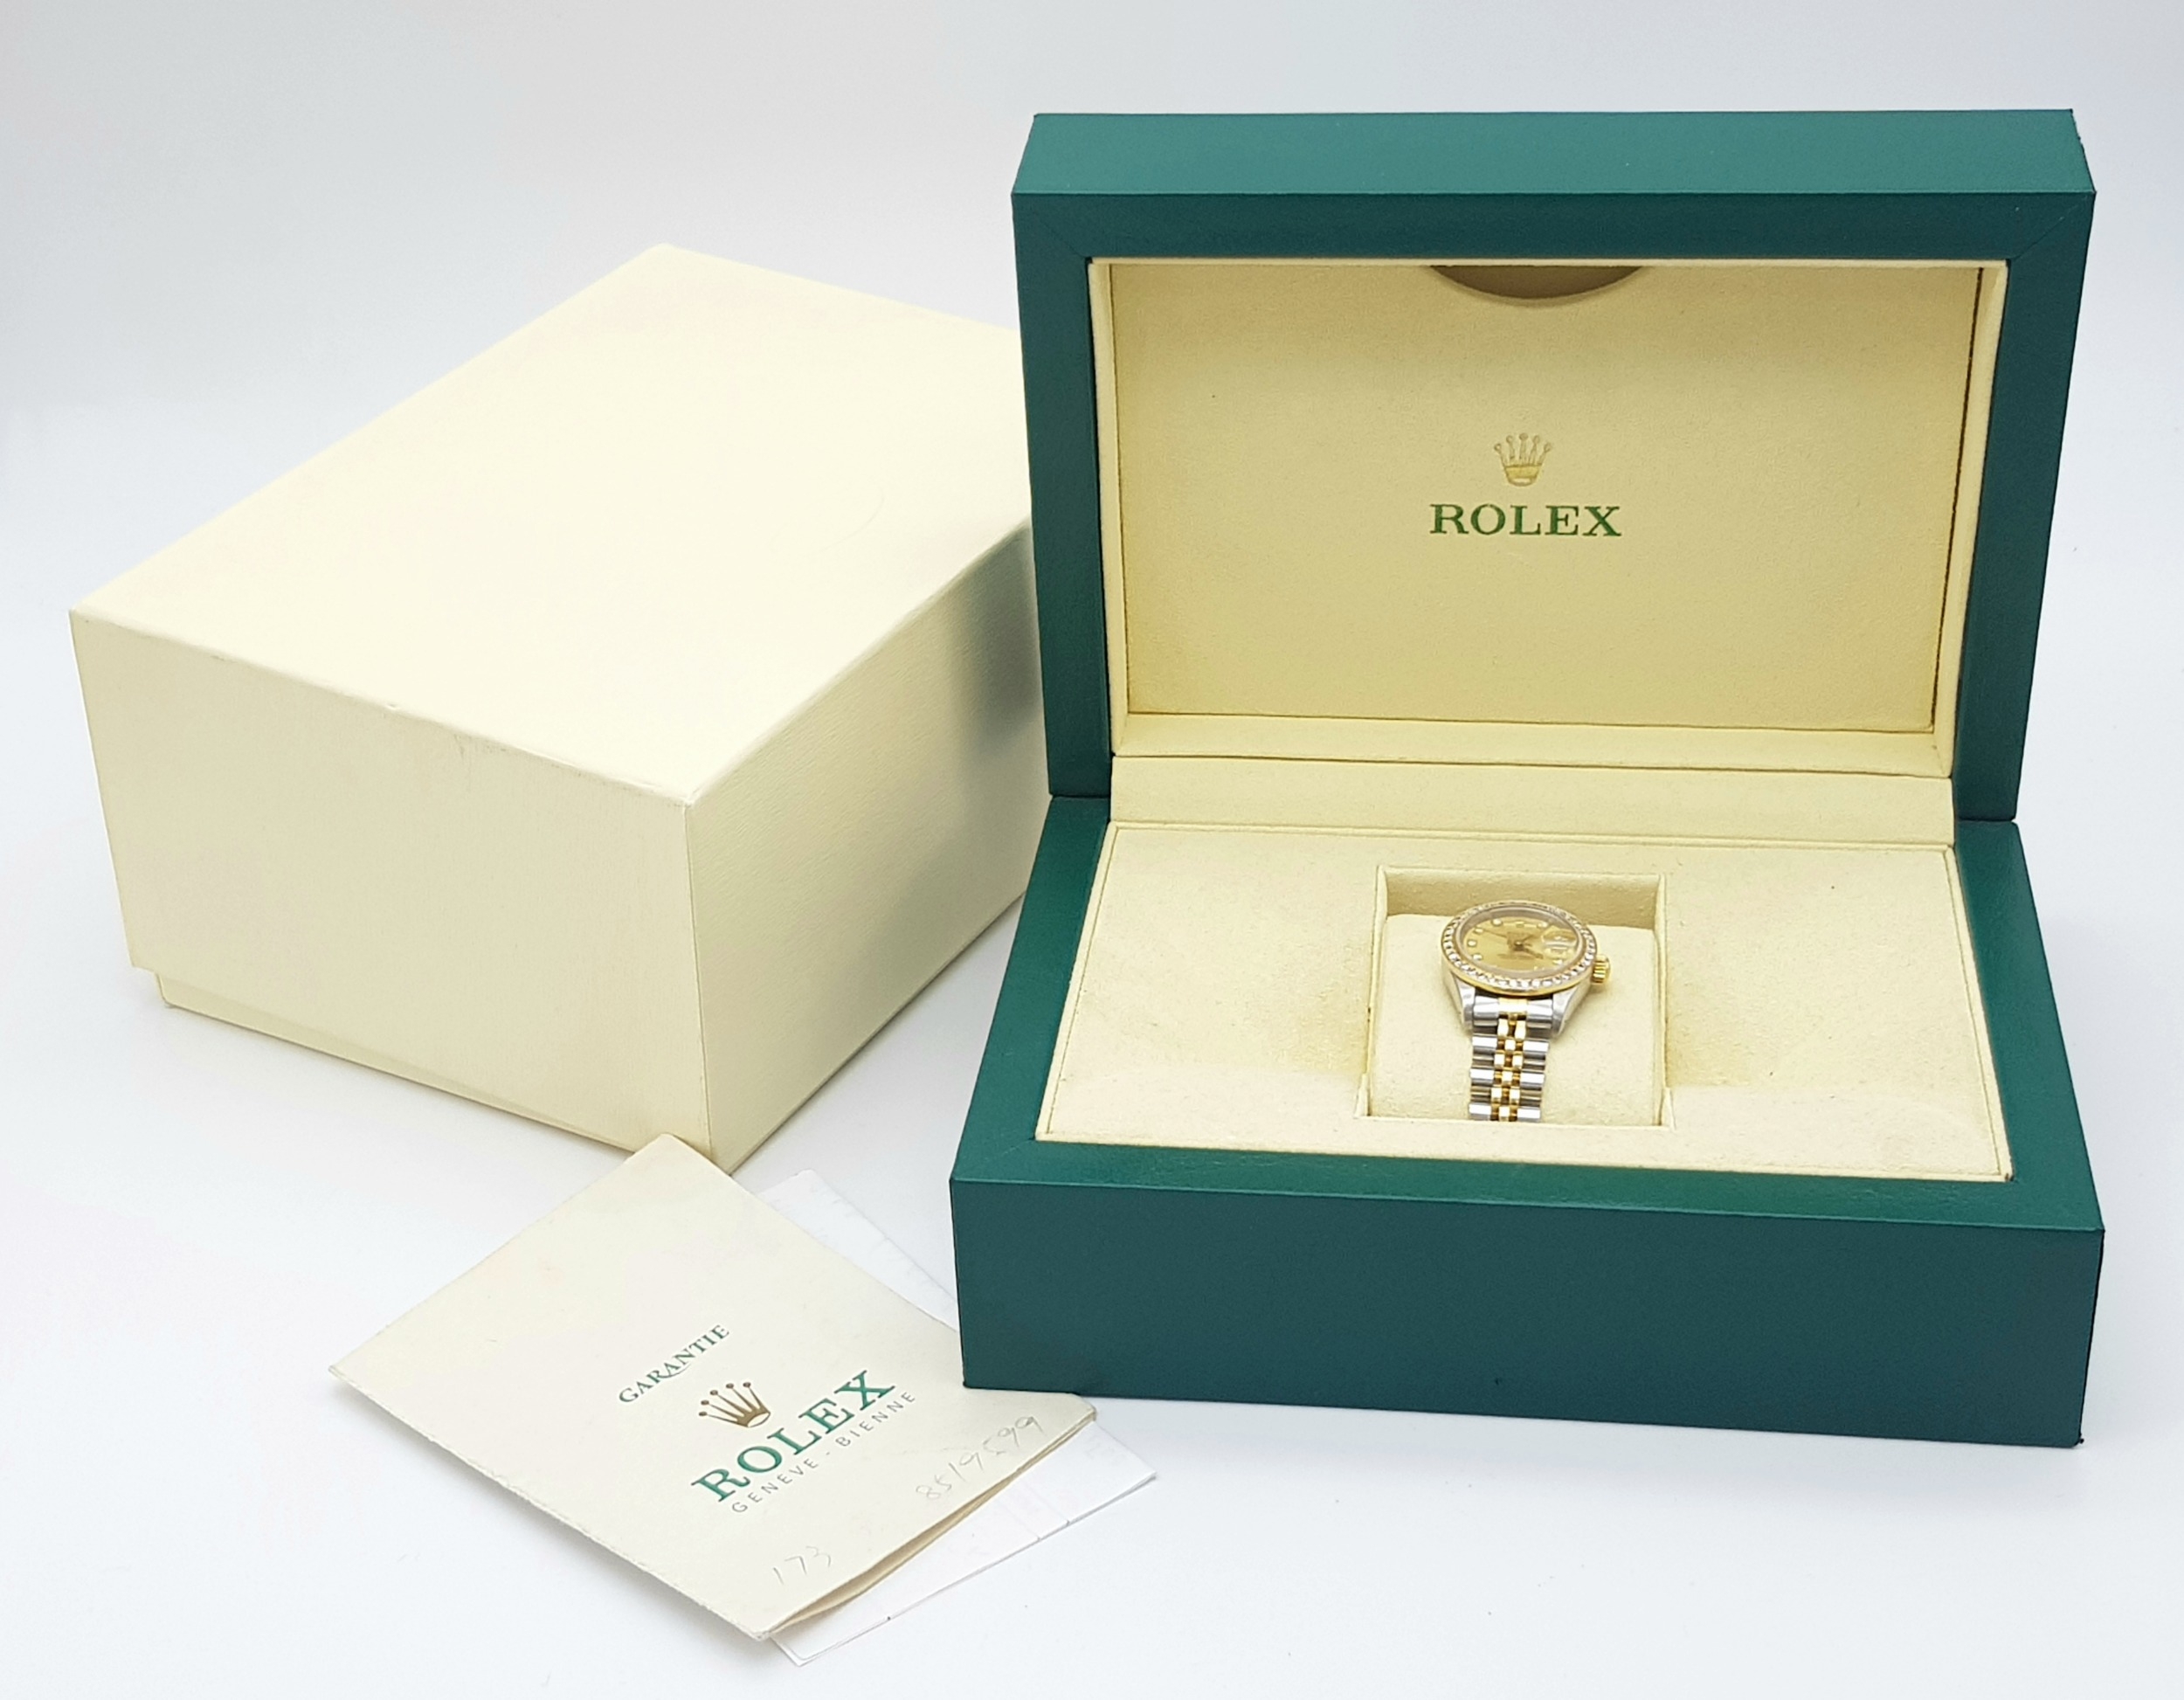 THE CLASSIC LADIES ROLEX BI-METAL OYSTER PERPETUAL DATEJUST WATCH IN VERY GOOD CONDITION HAVING A - Image 11 of 11